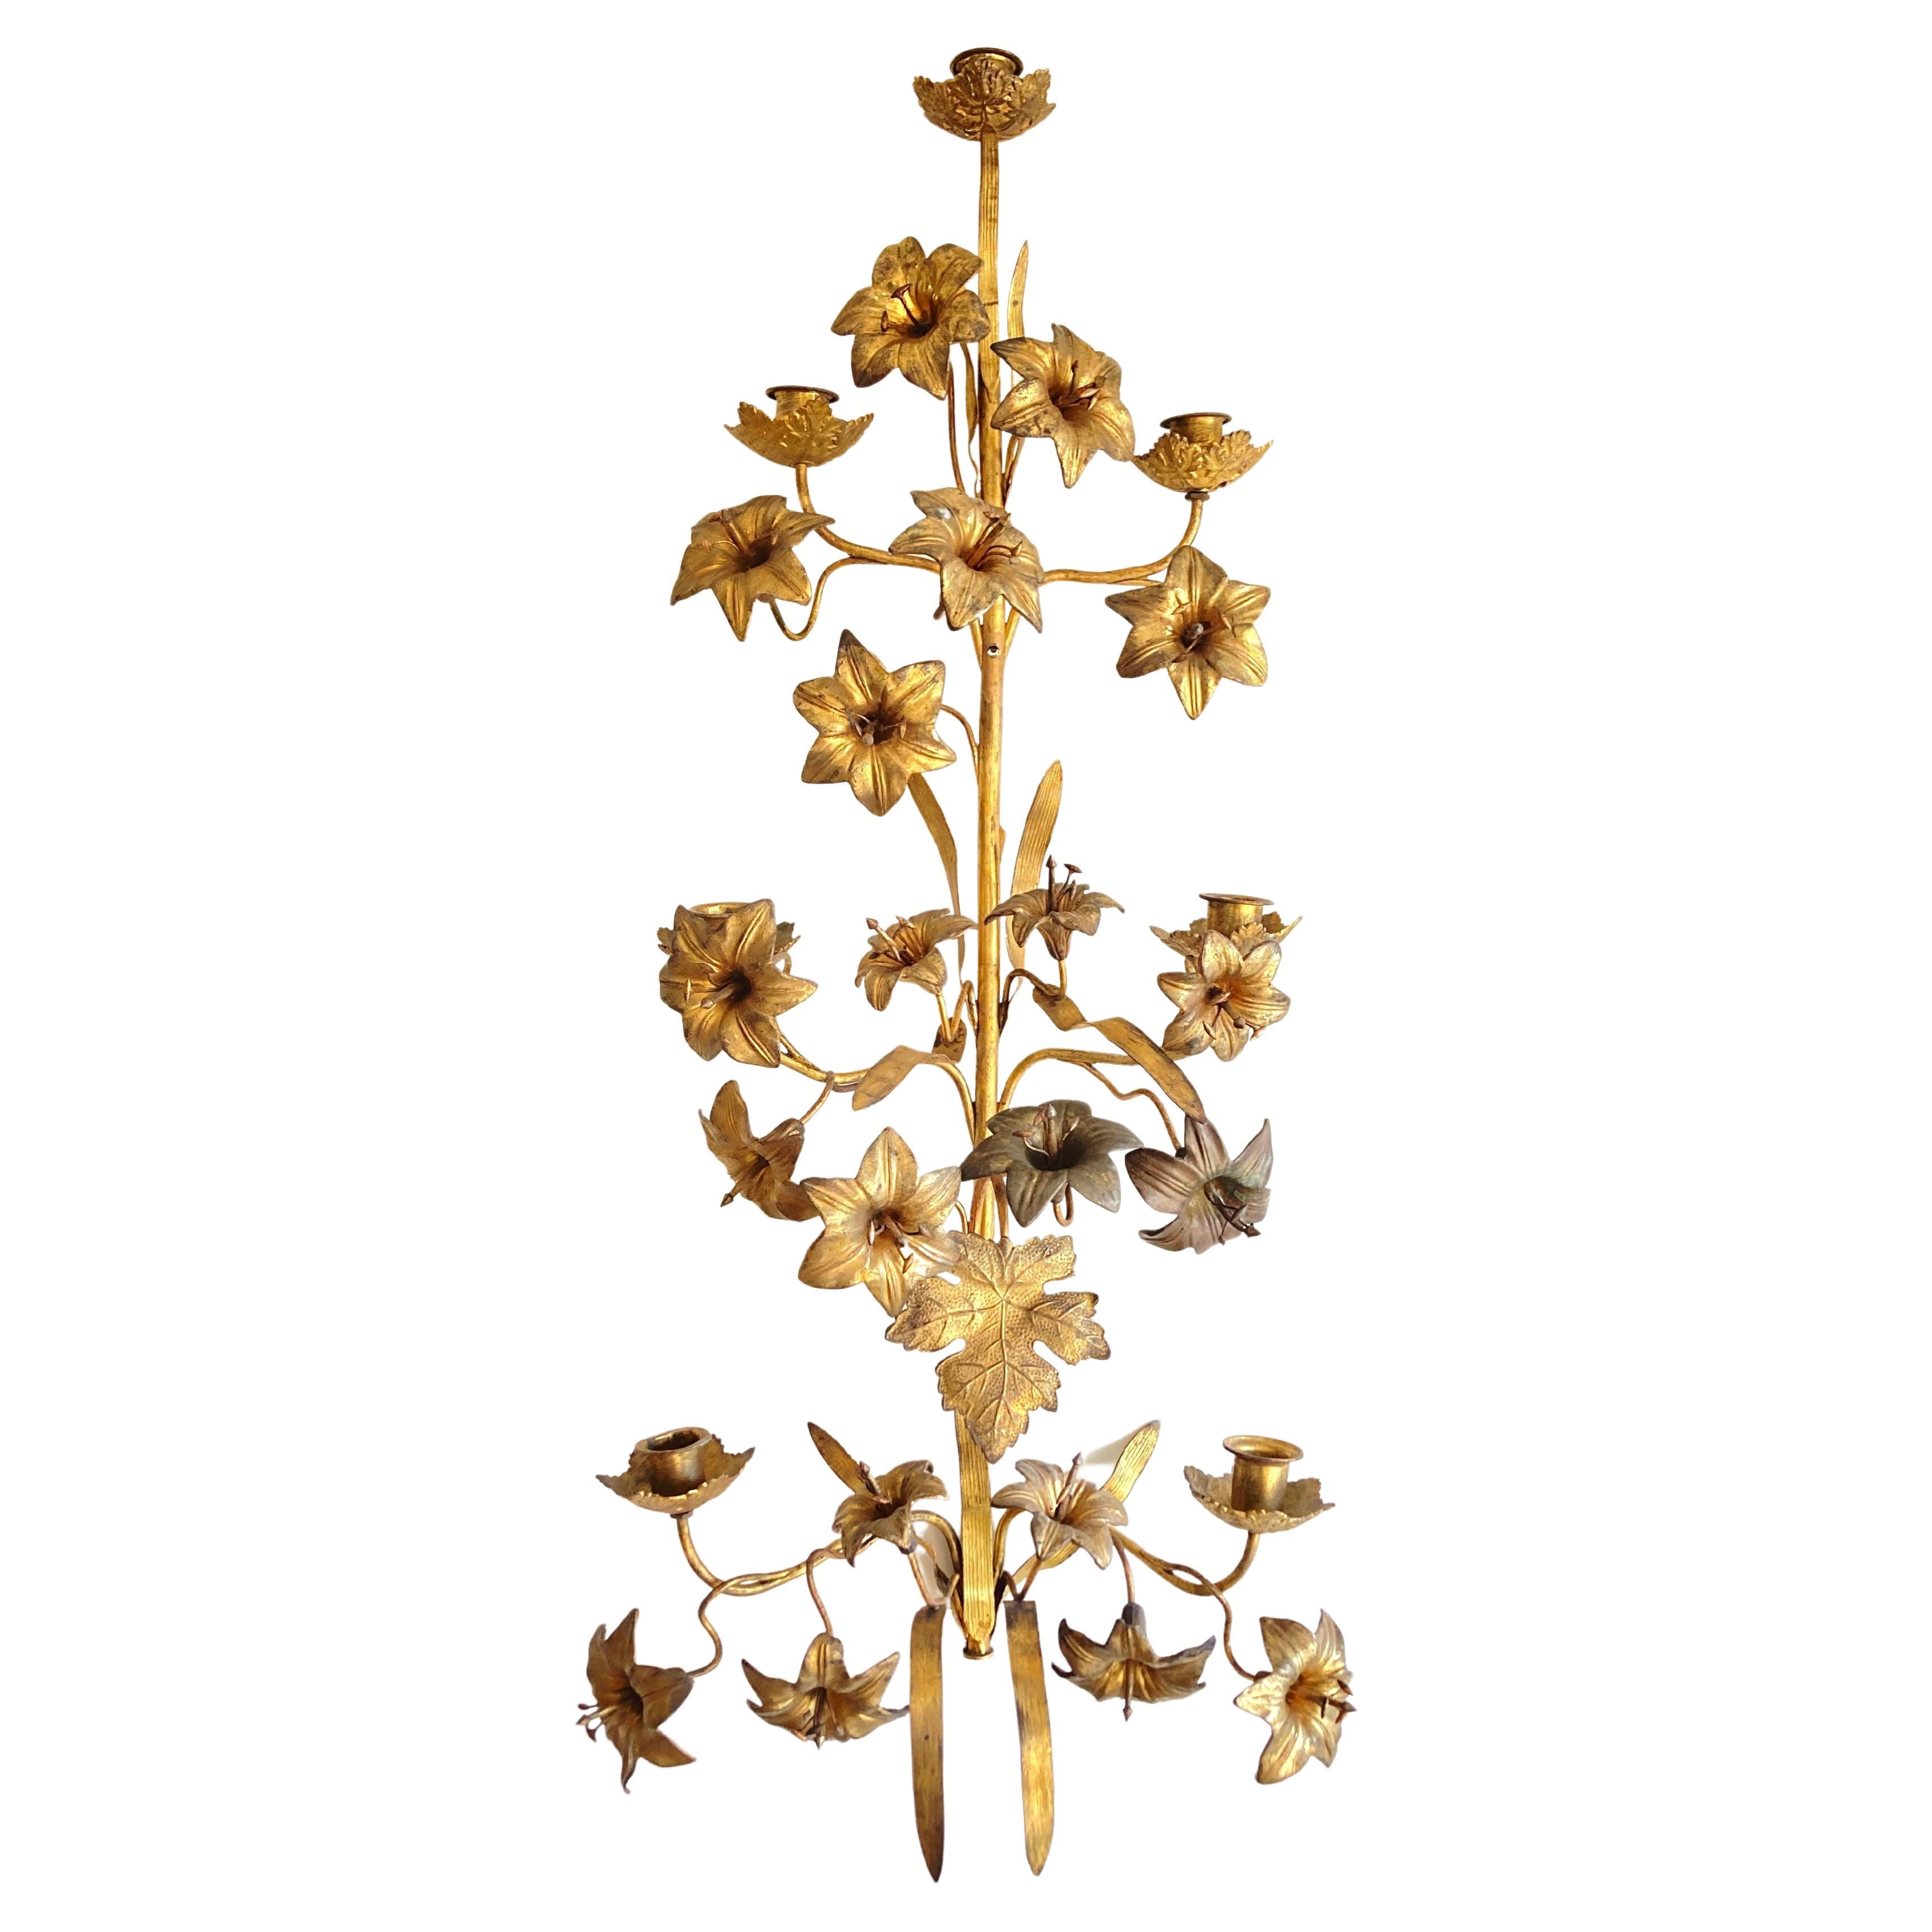 Large Antique 19th Century French Floral Church Wall Sconce in Brass for Candles For Sale